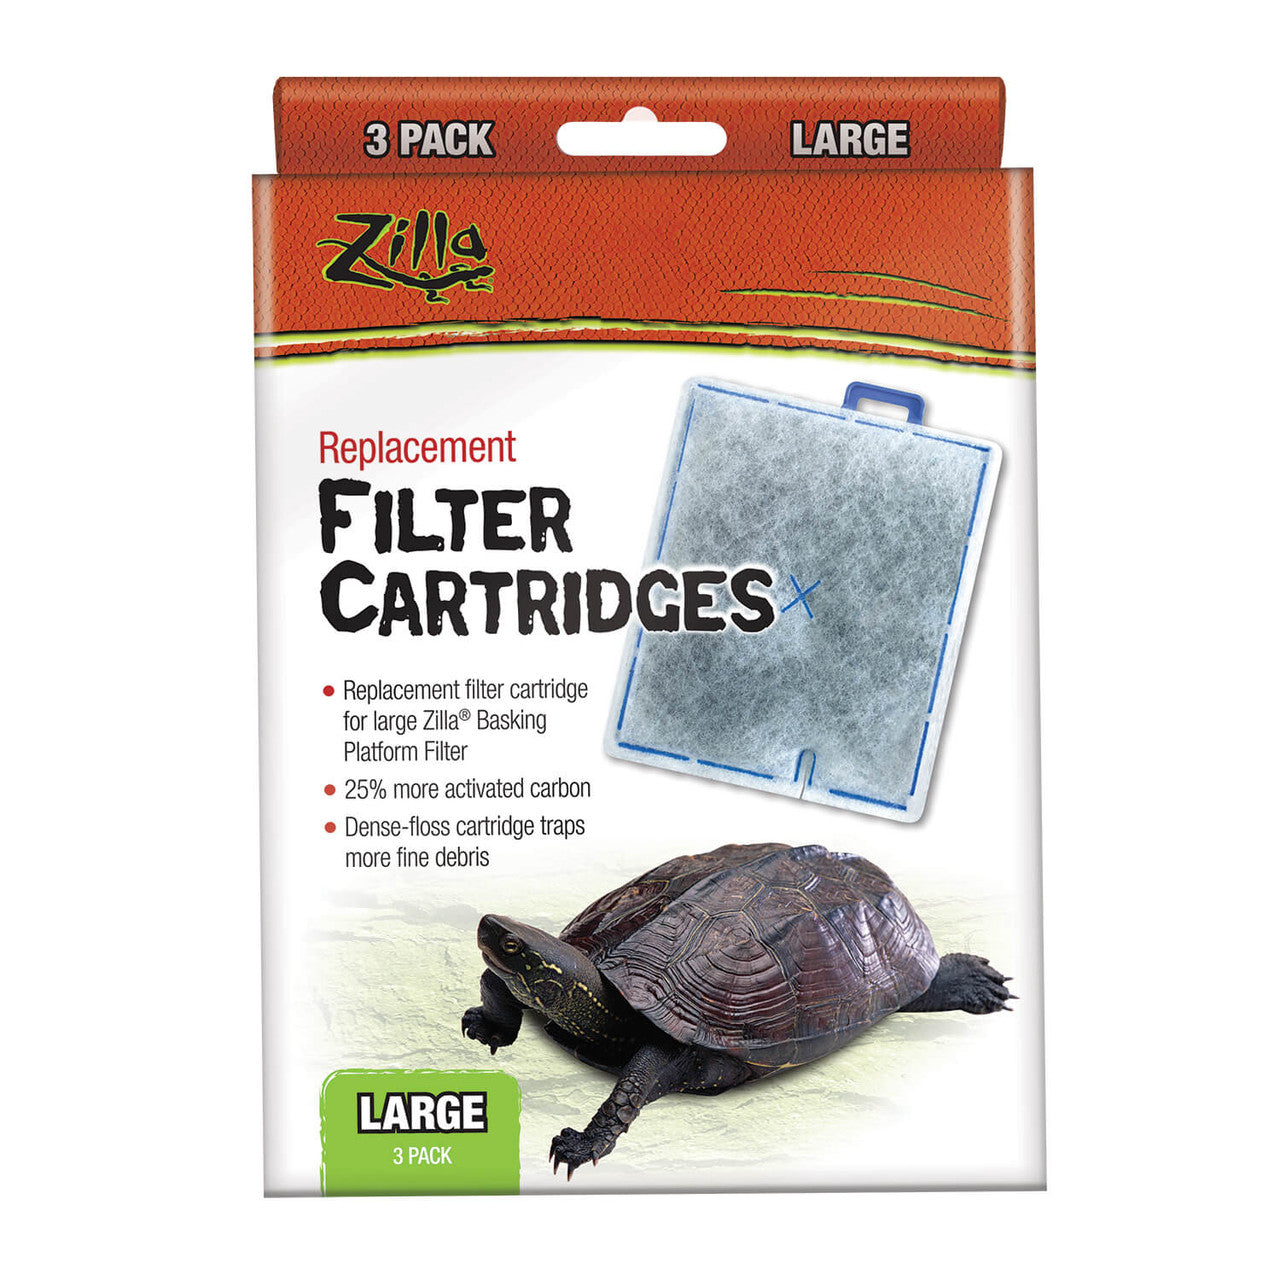 Zilla Replacement Filter Cartridges Large, 3 Pack